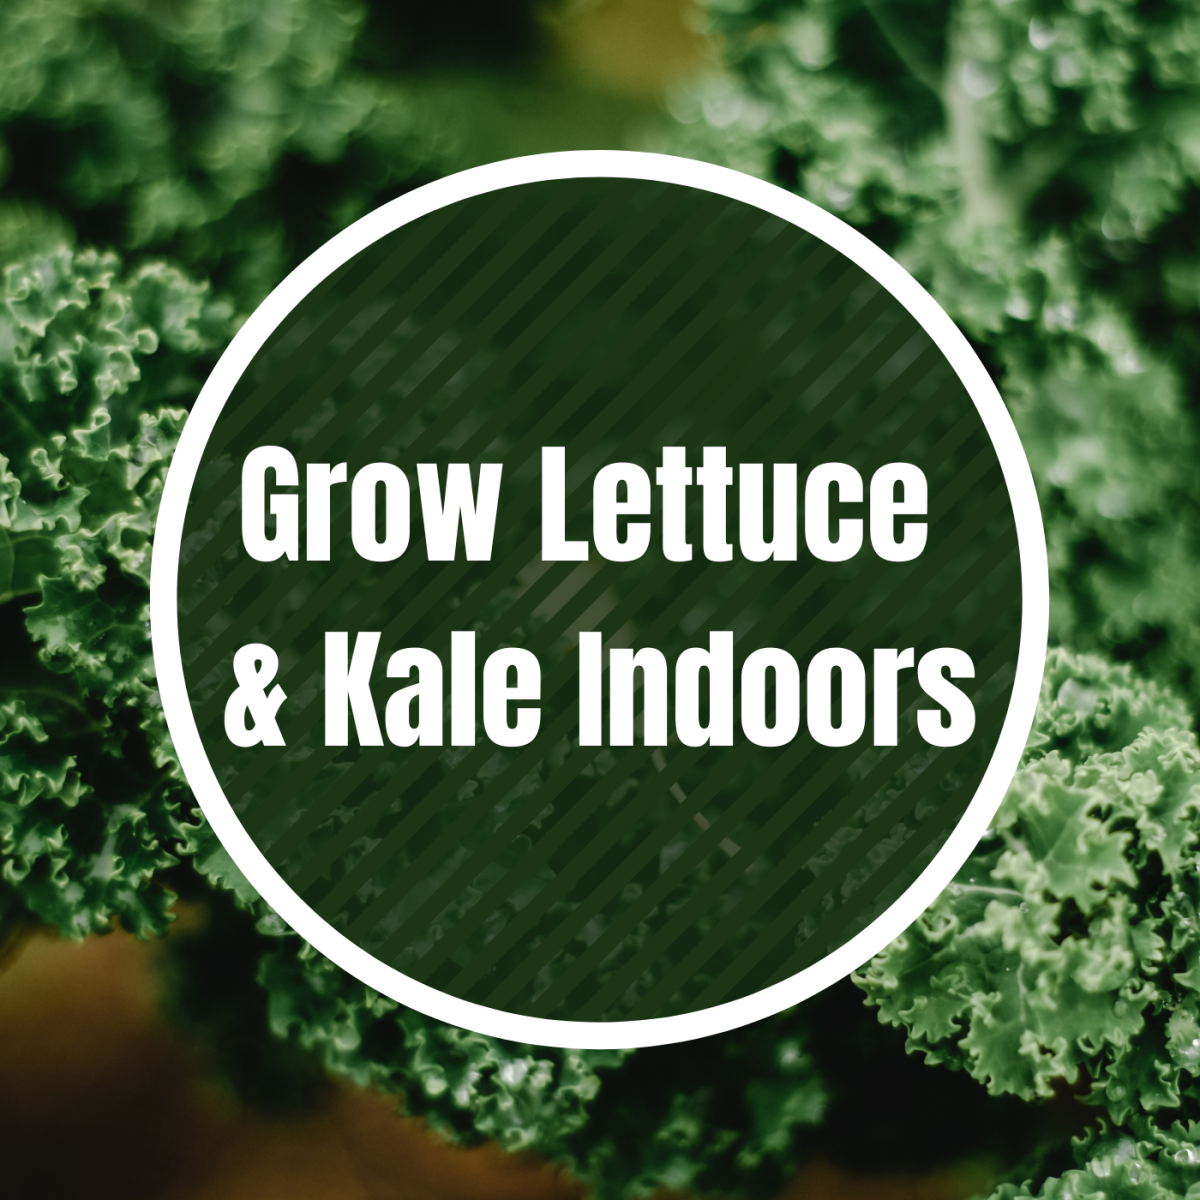 Grow lettuce and kale indoors.